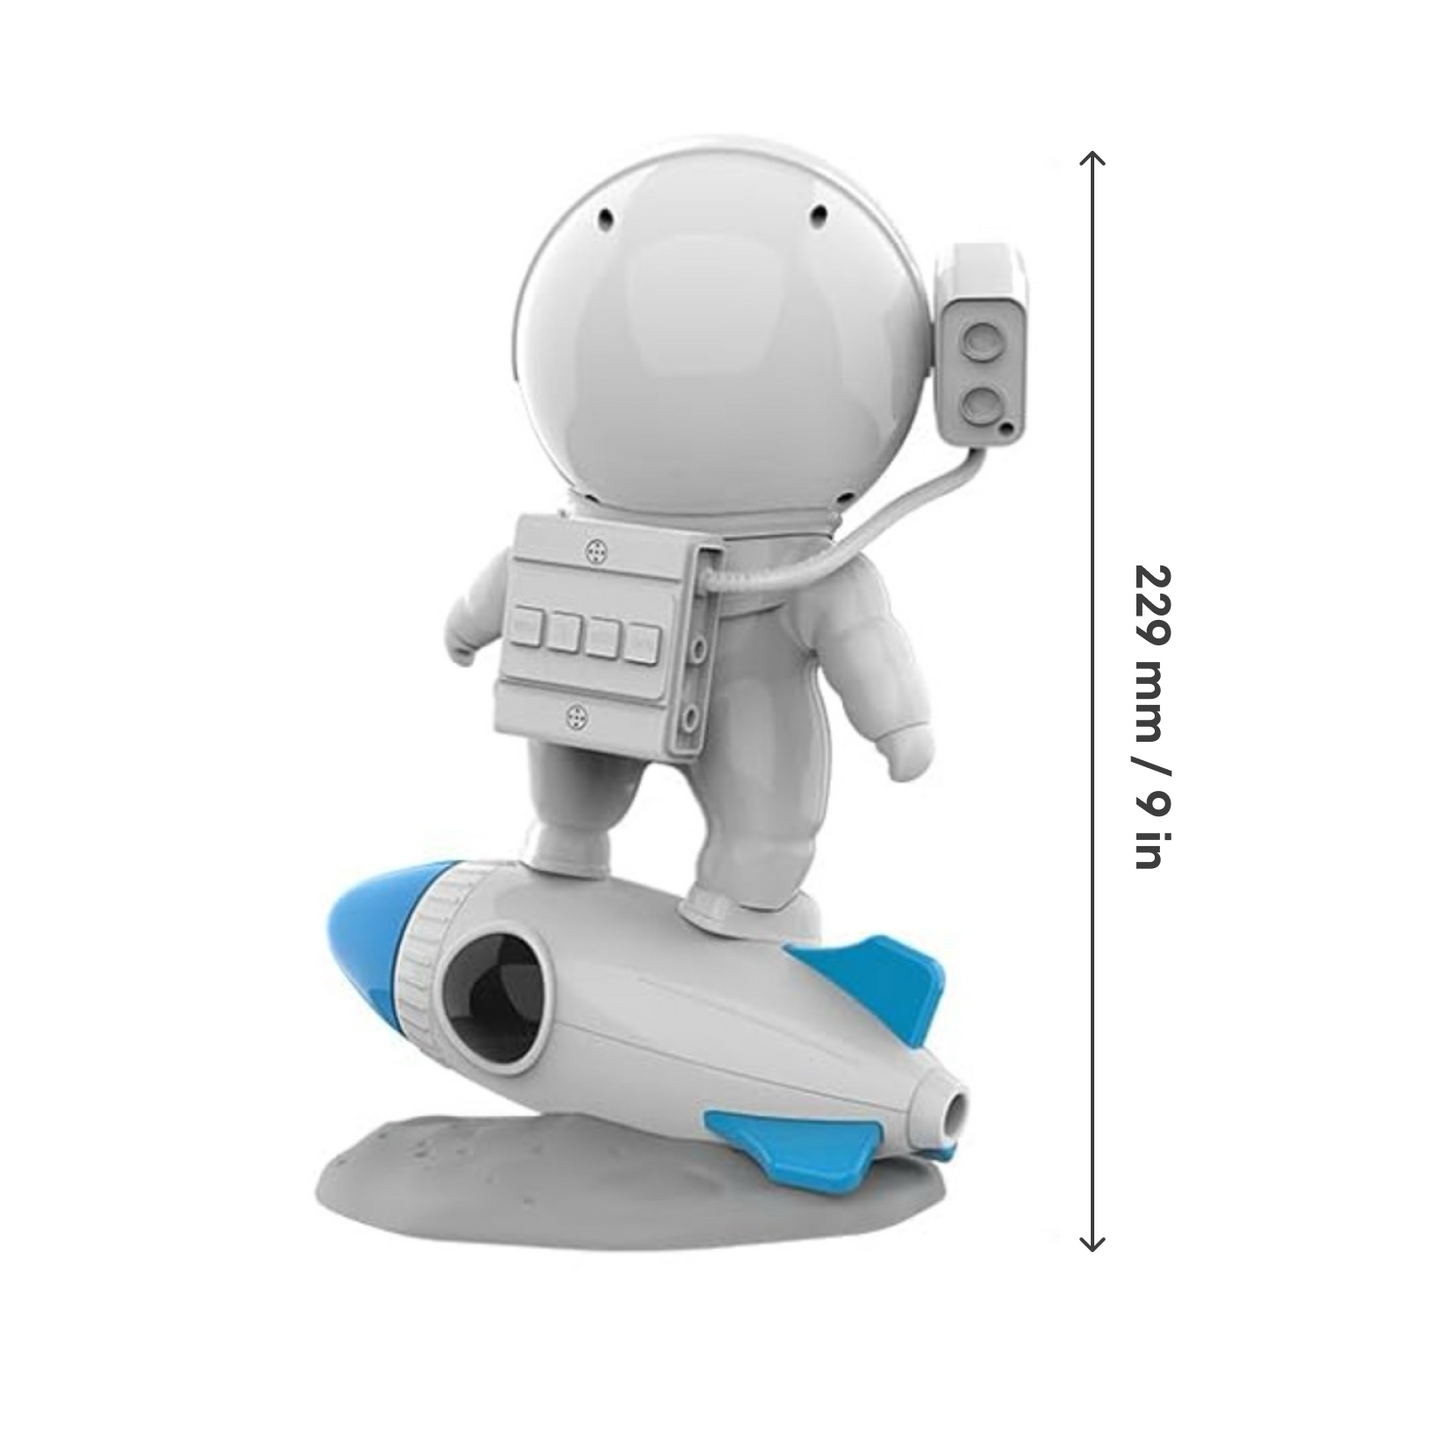 🚀Rocket Astronaut Galaxy Projector Lamp (🔥LIMITED FREE SHIPPING🔥)